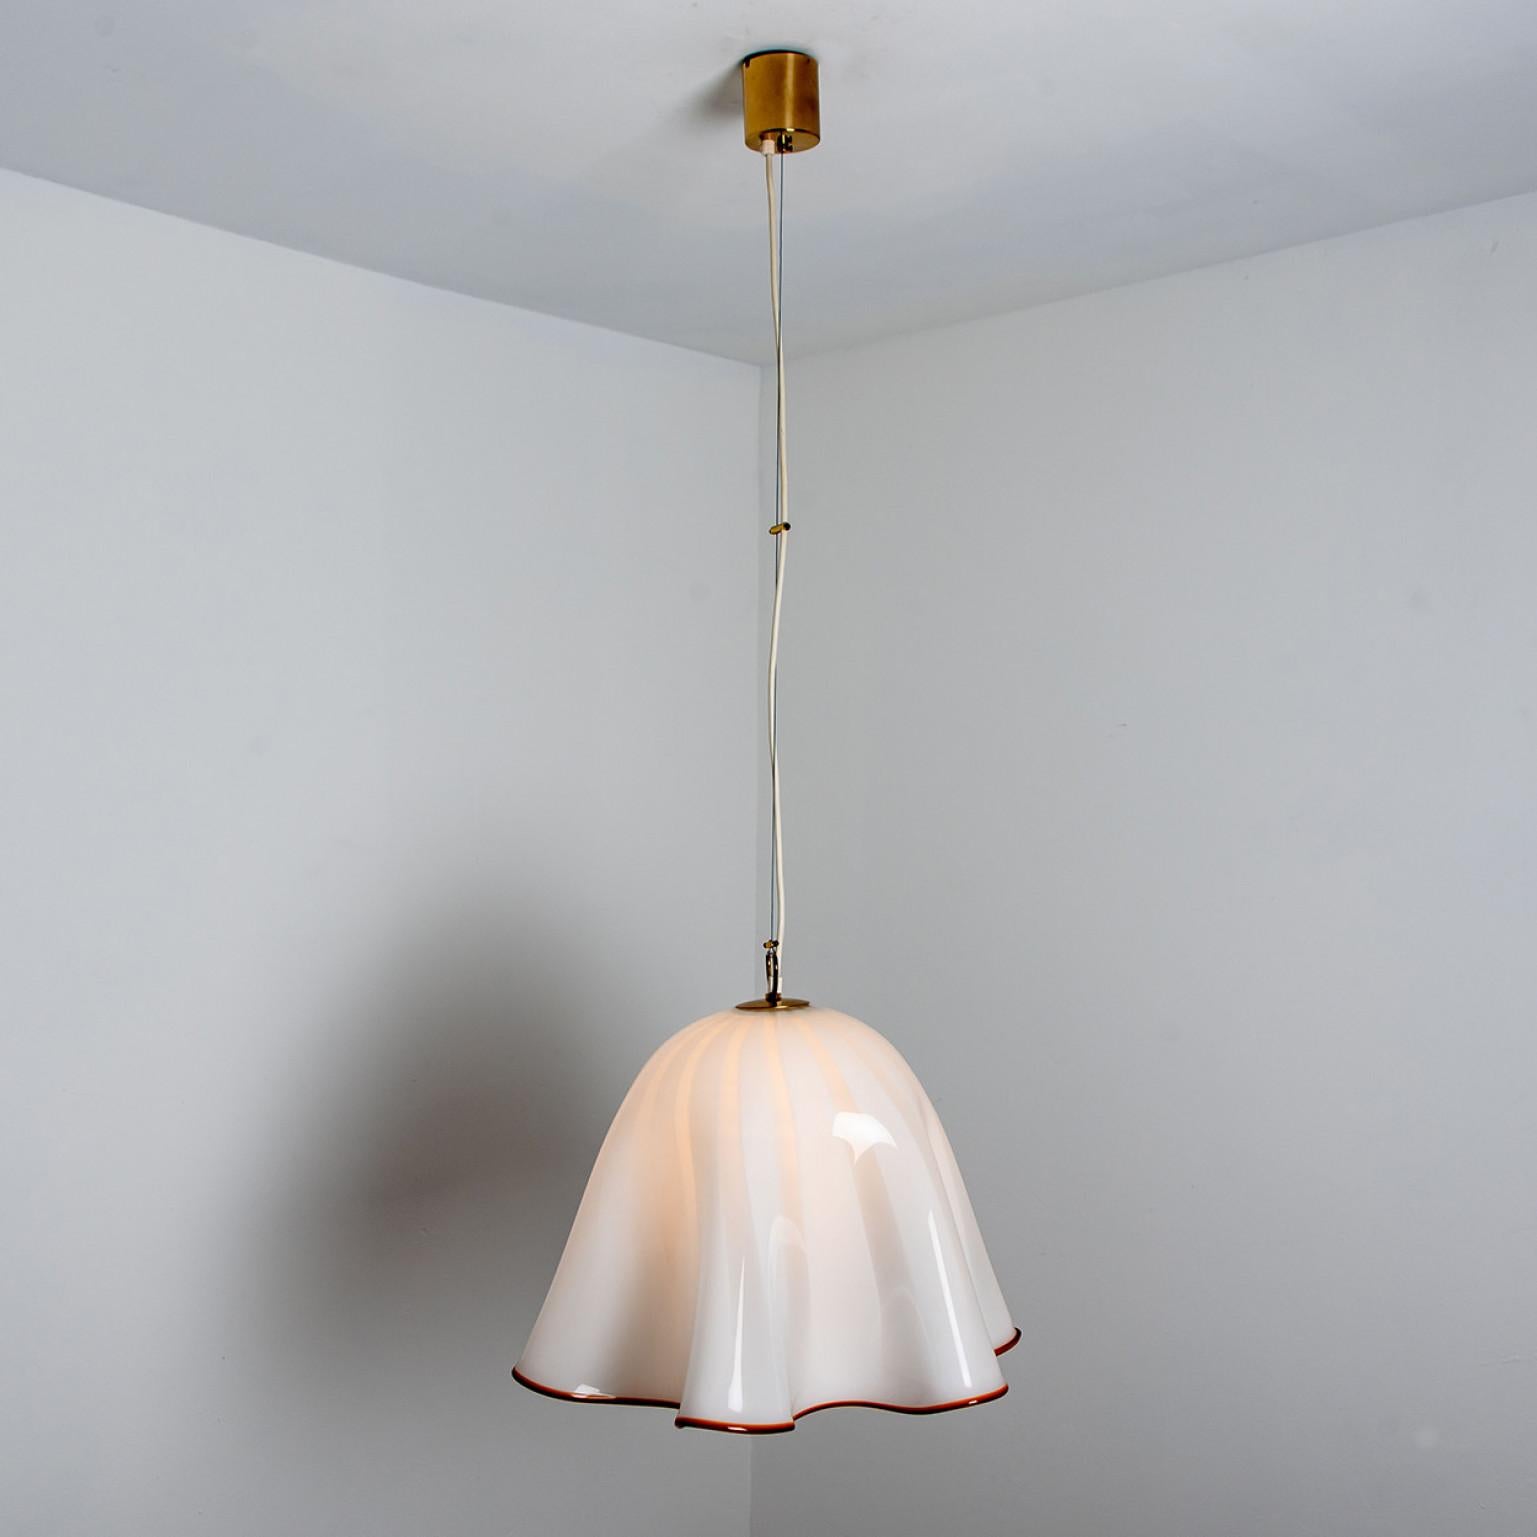 1 of the 2 Large Murano Glass Fazzoletto Pendant Light by J.T. Kalmar, 1960s For Sale 3